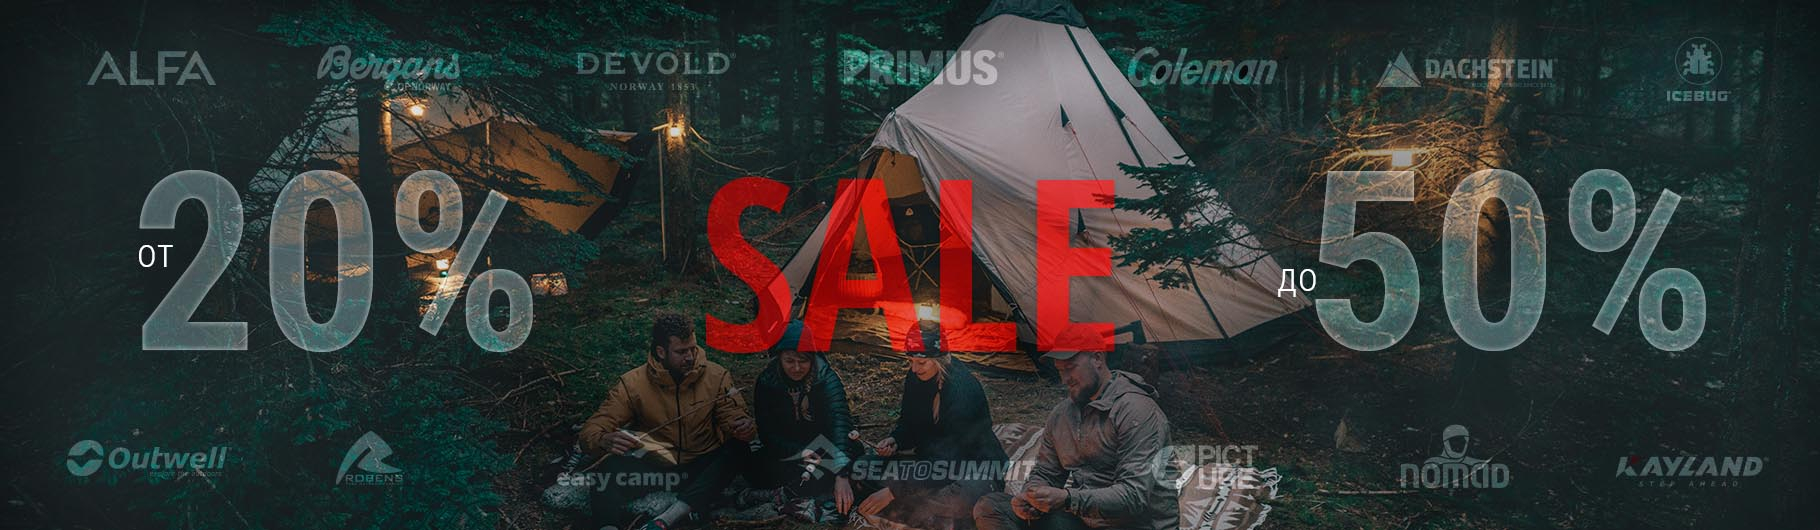 sale-camping-outdoor-equipment